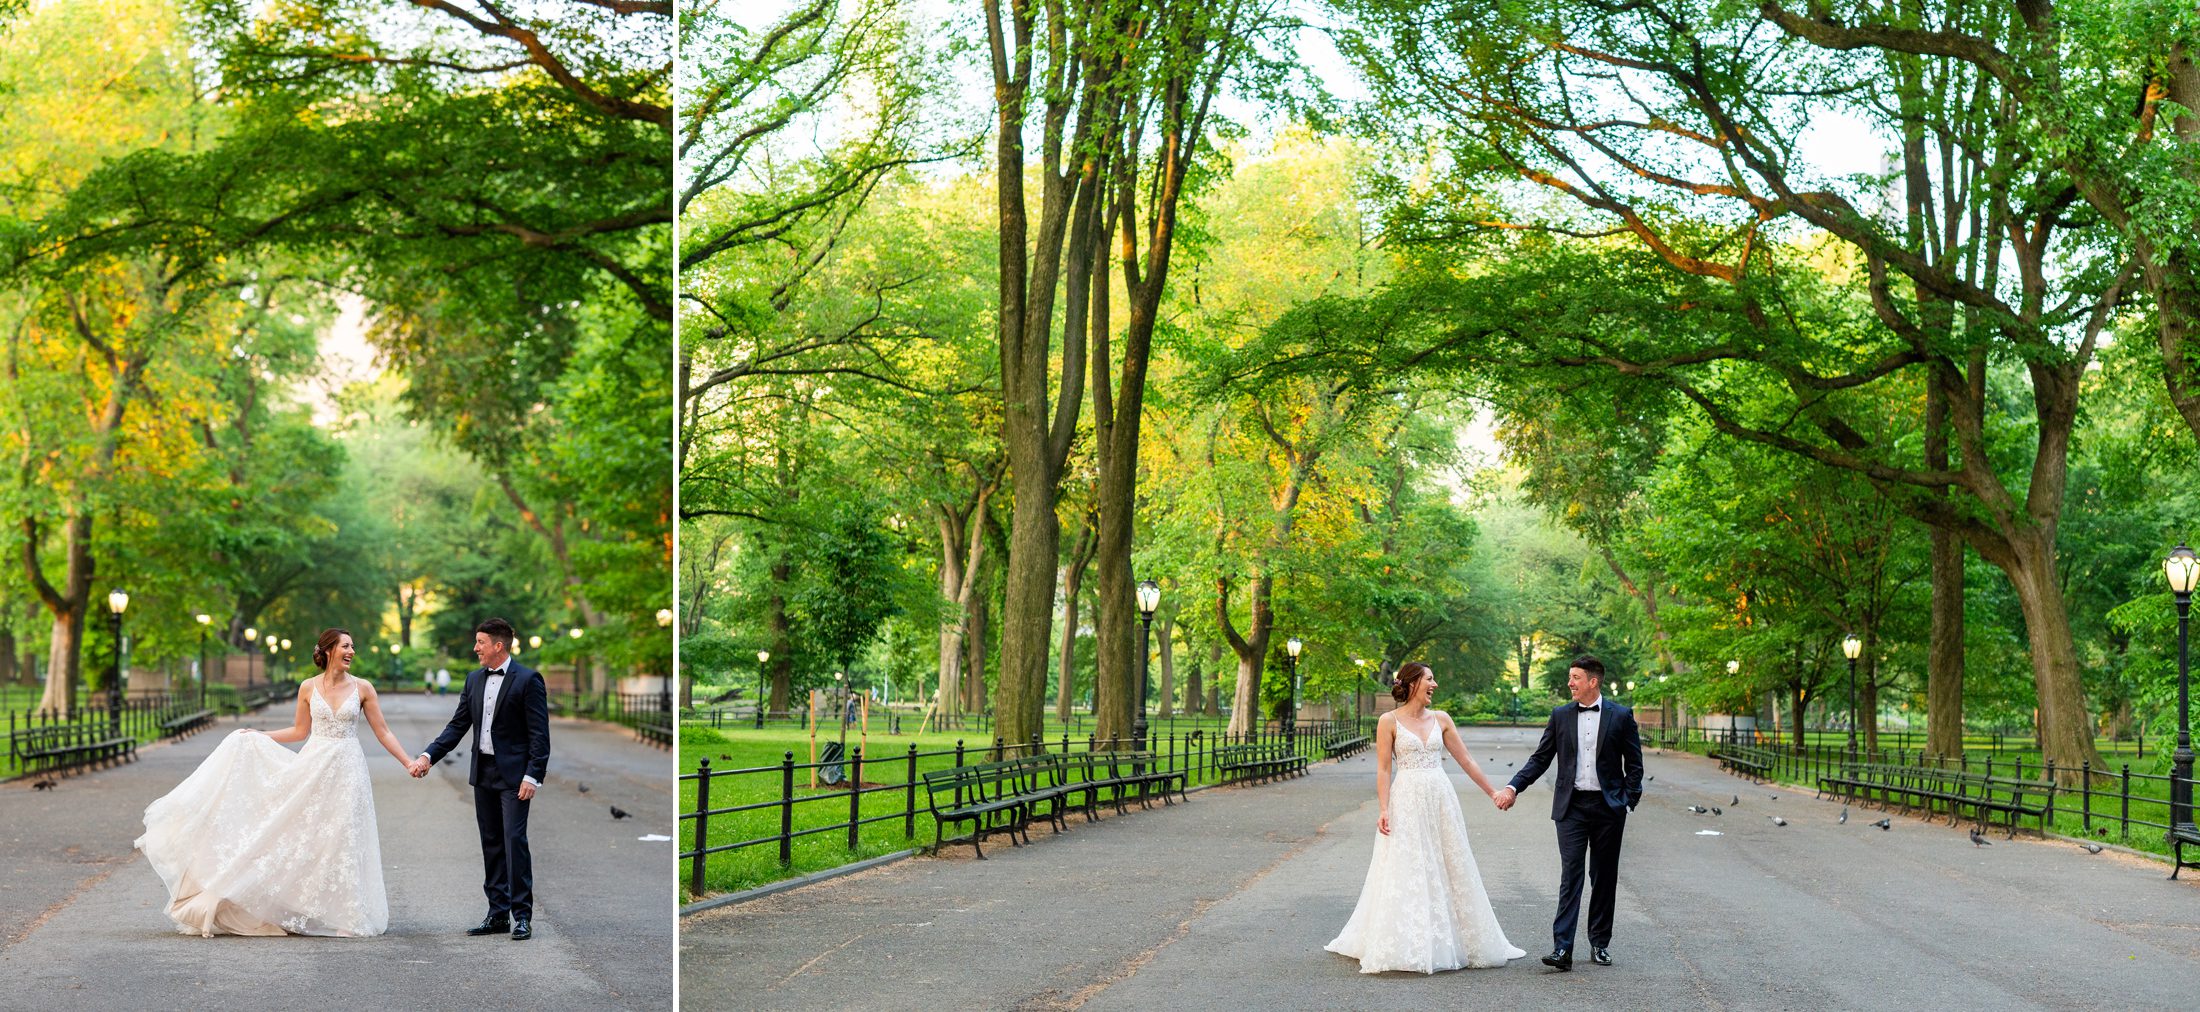 Bride and groom walking in Central Park 